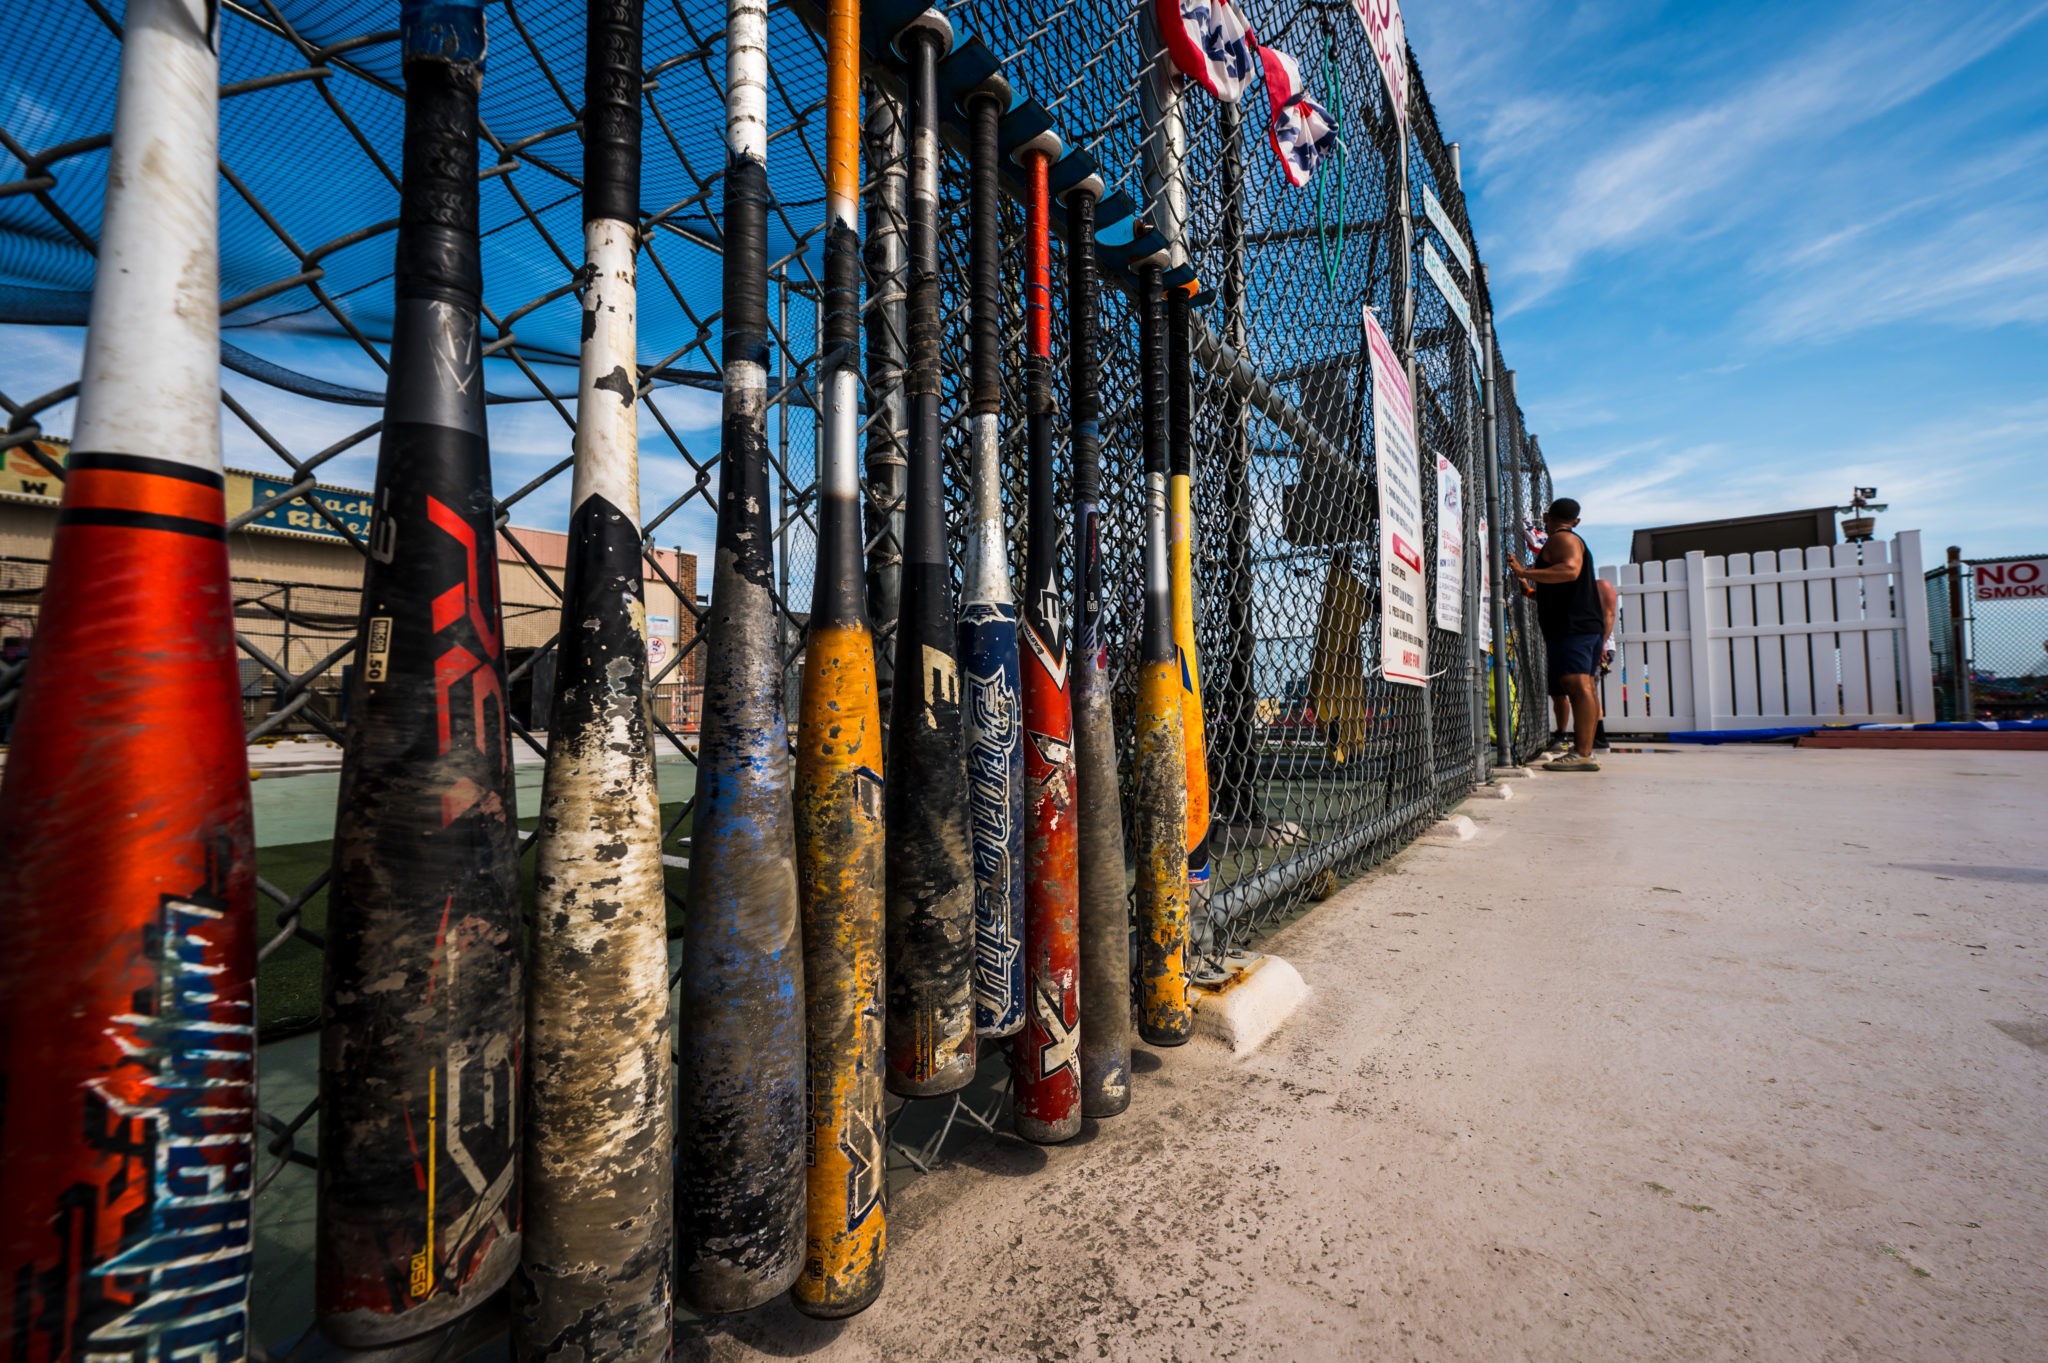 Bats lined up at batting cages located at Jenkinson's Boardwalk